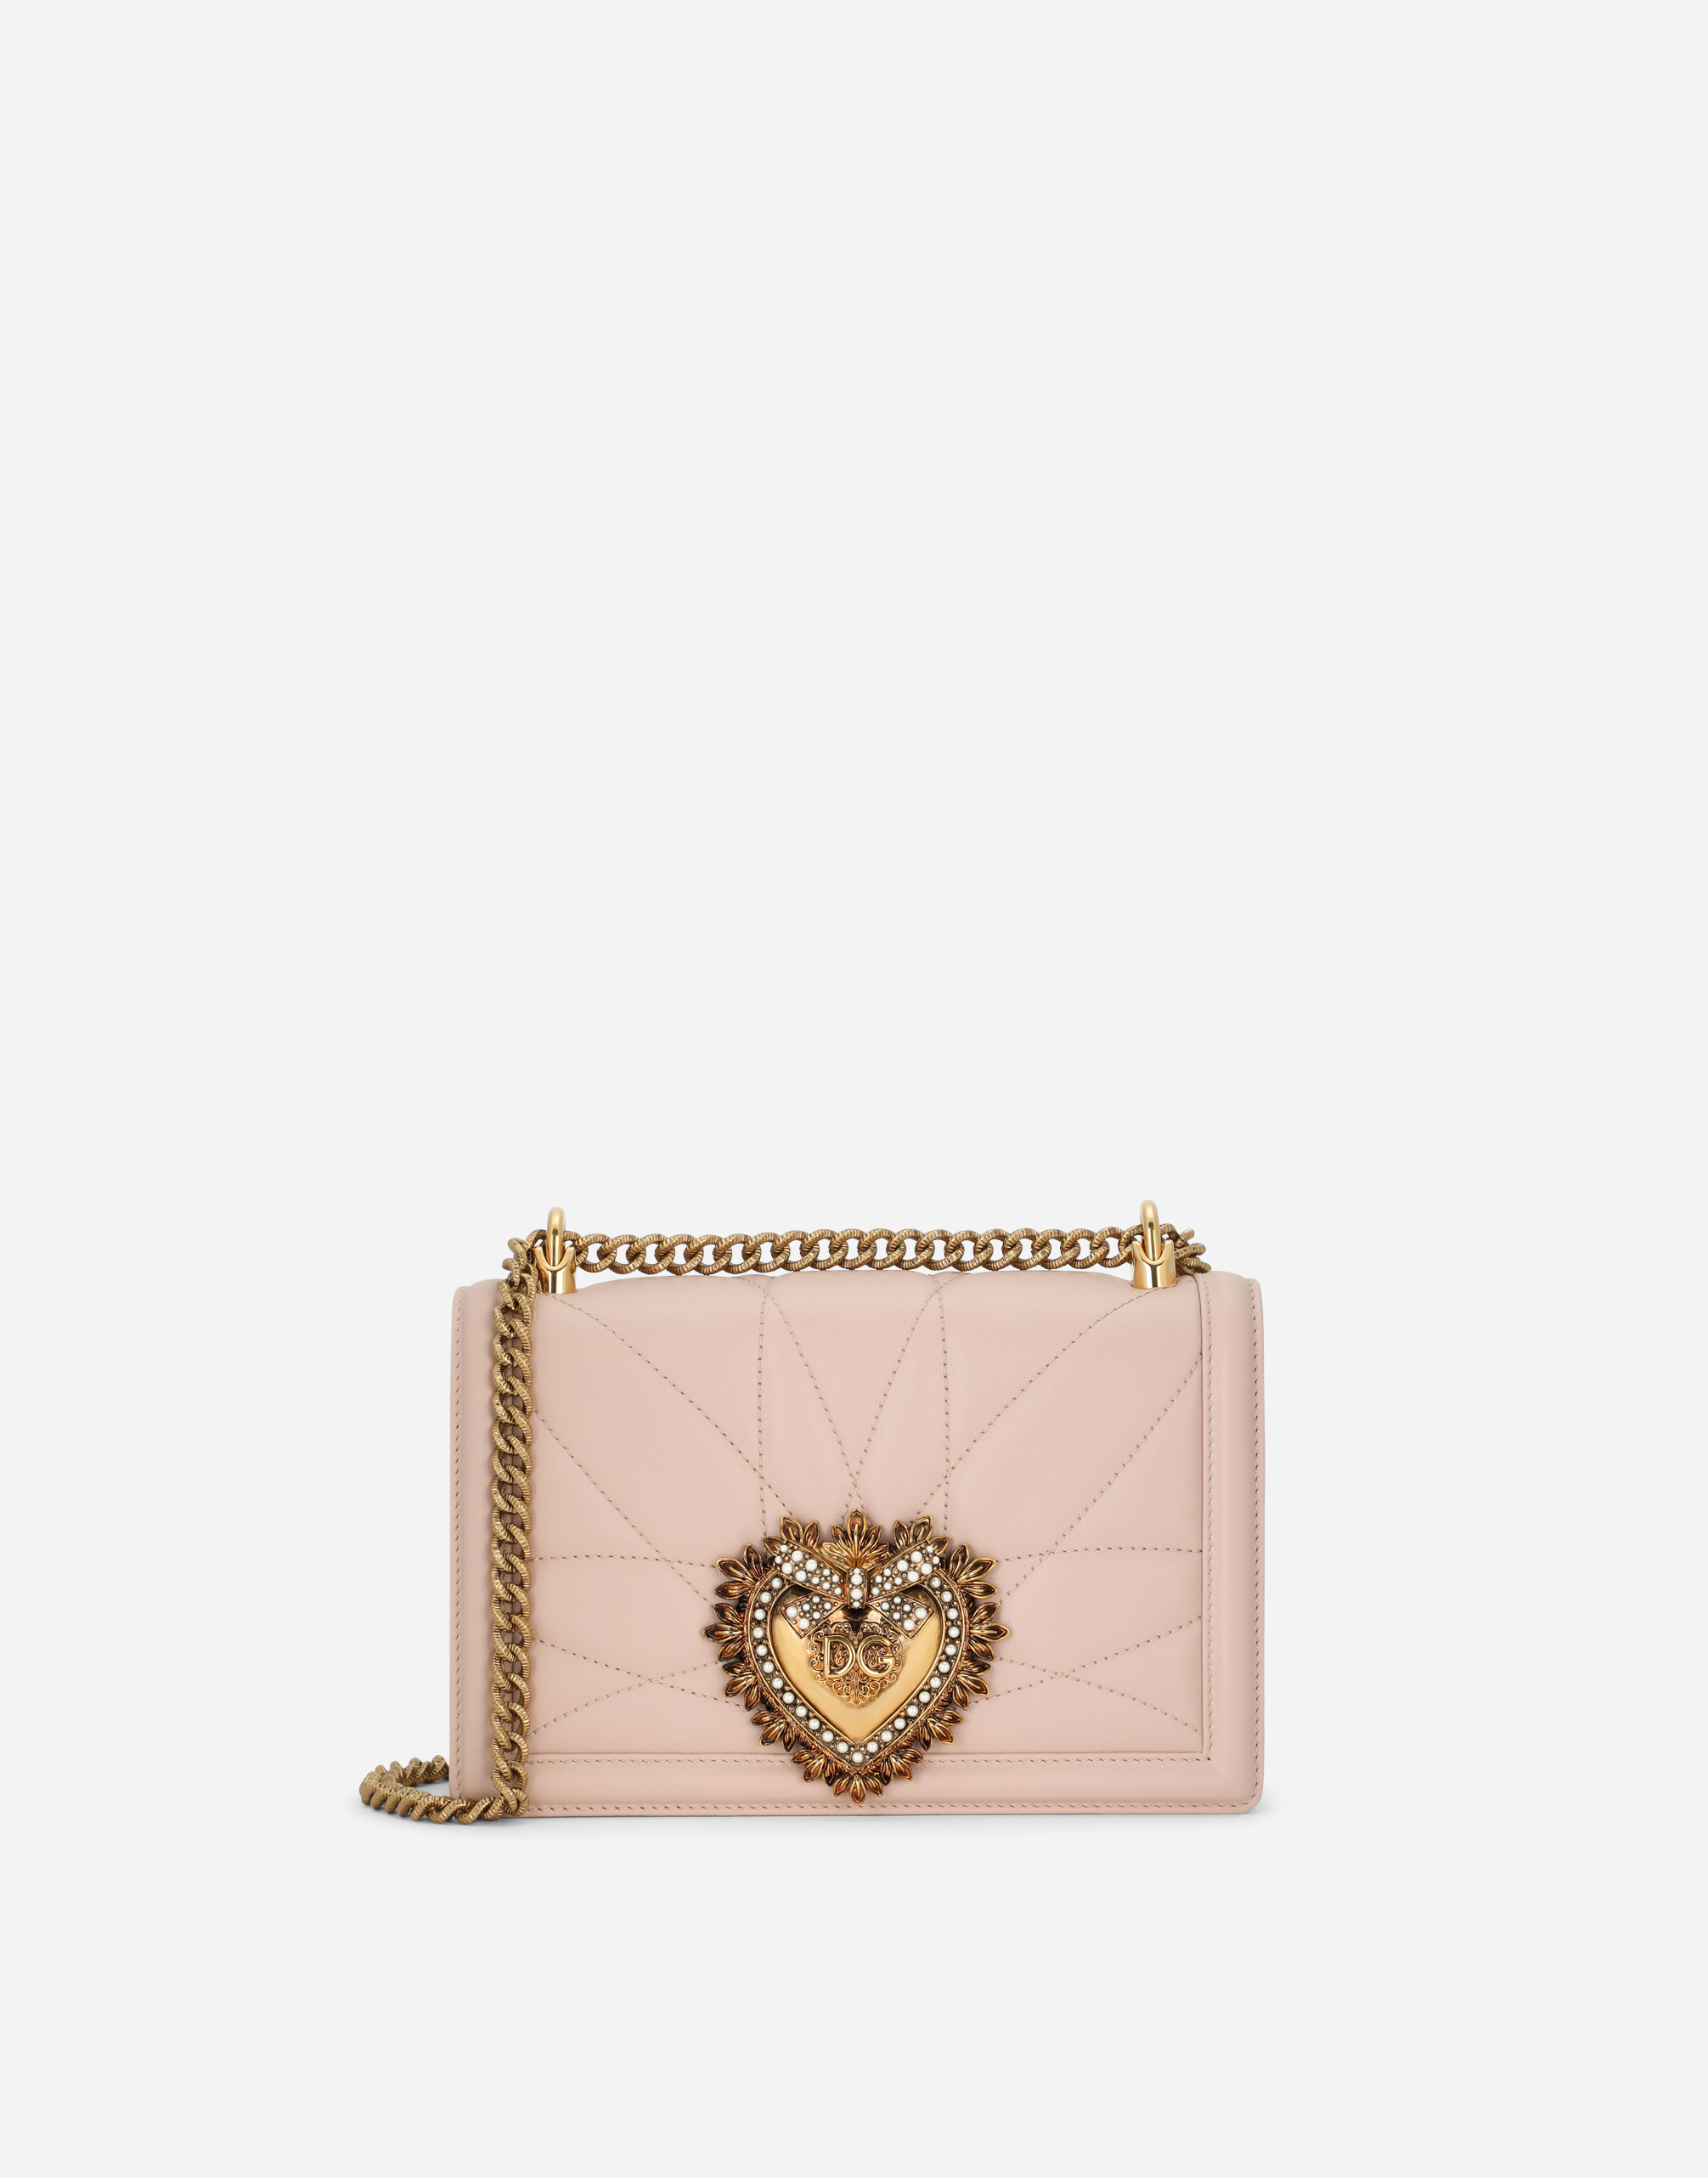 Medium Devotion crossbody bag in quilted nappa leather in Pale Pink